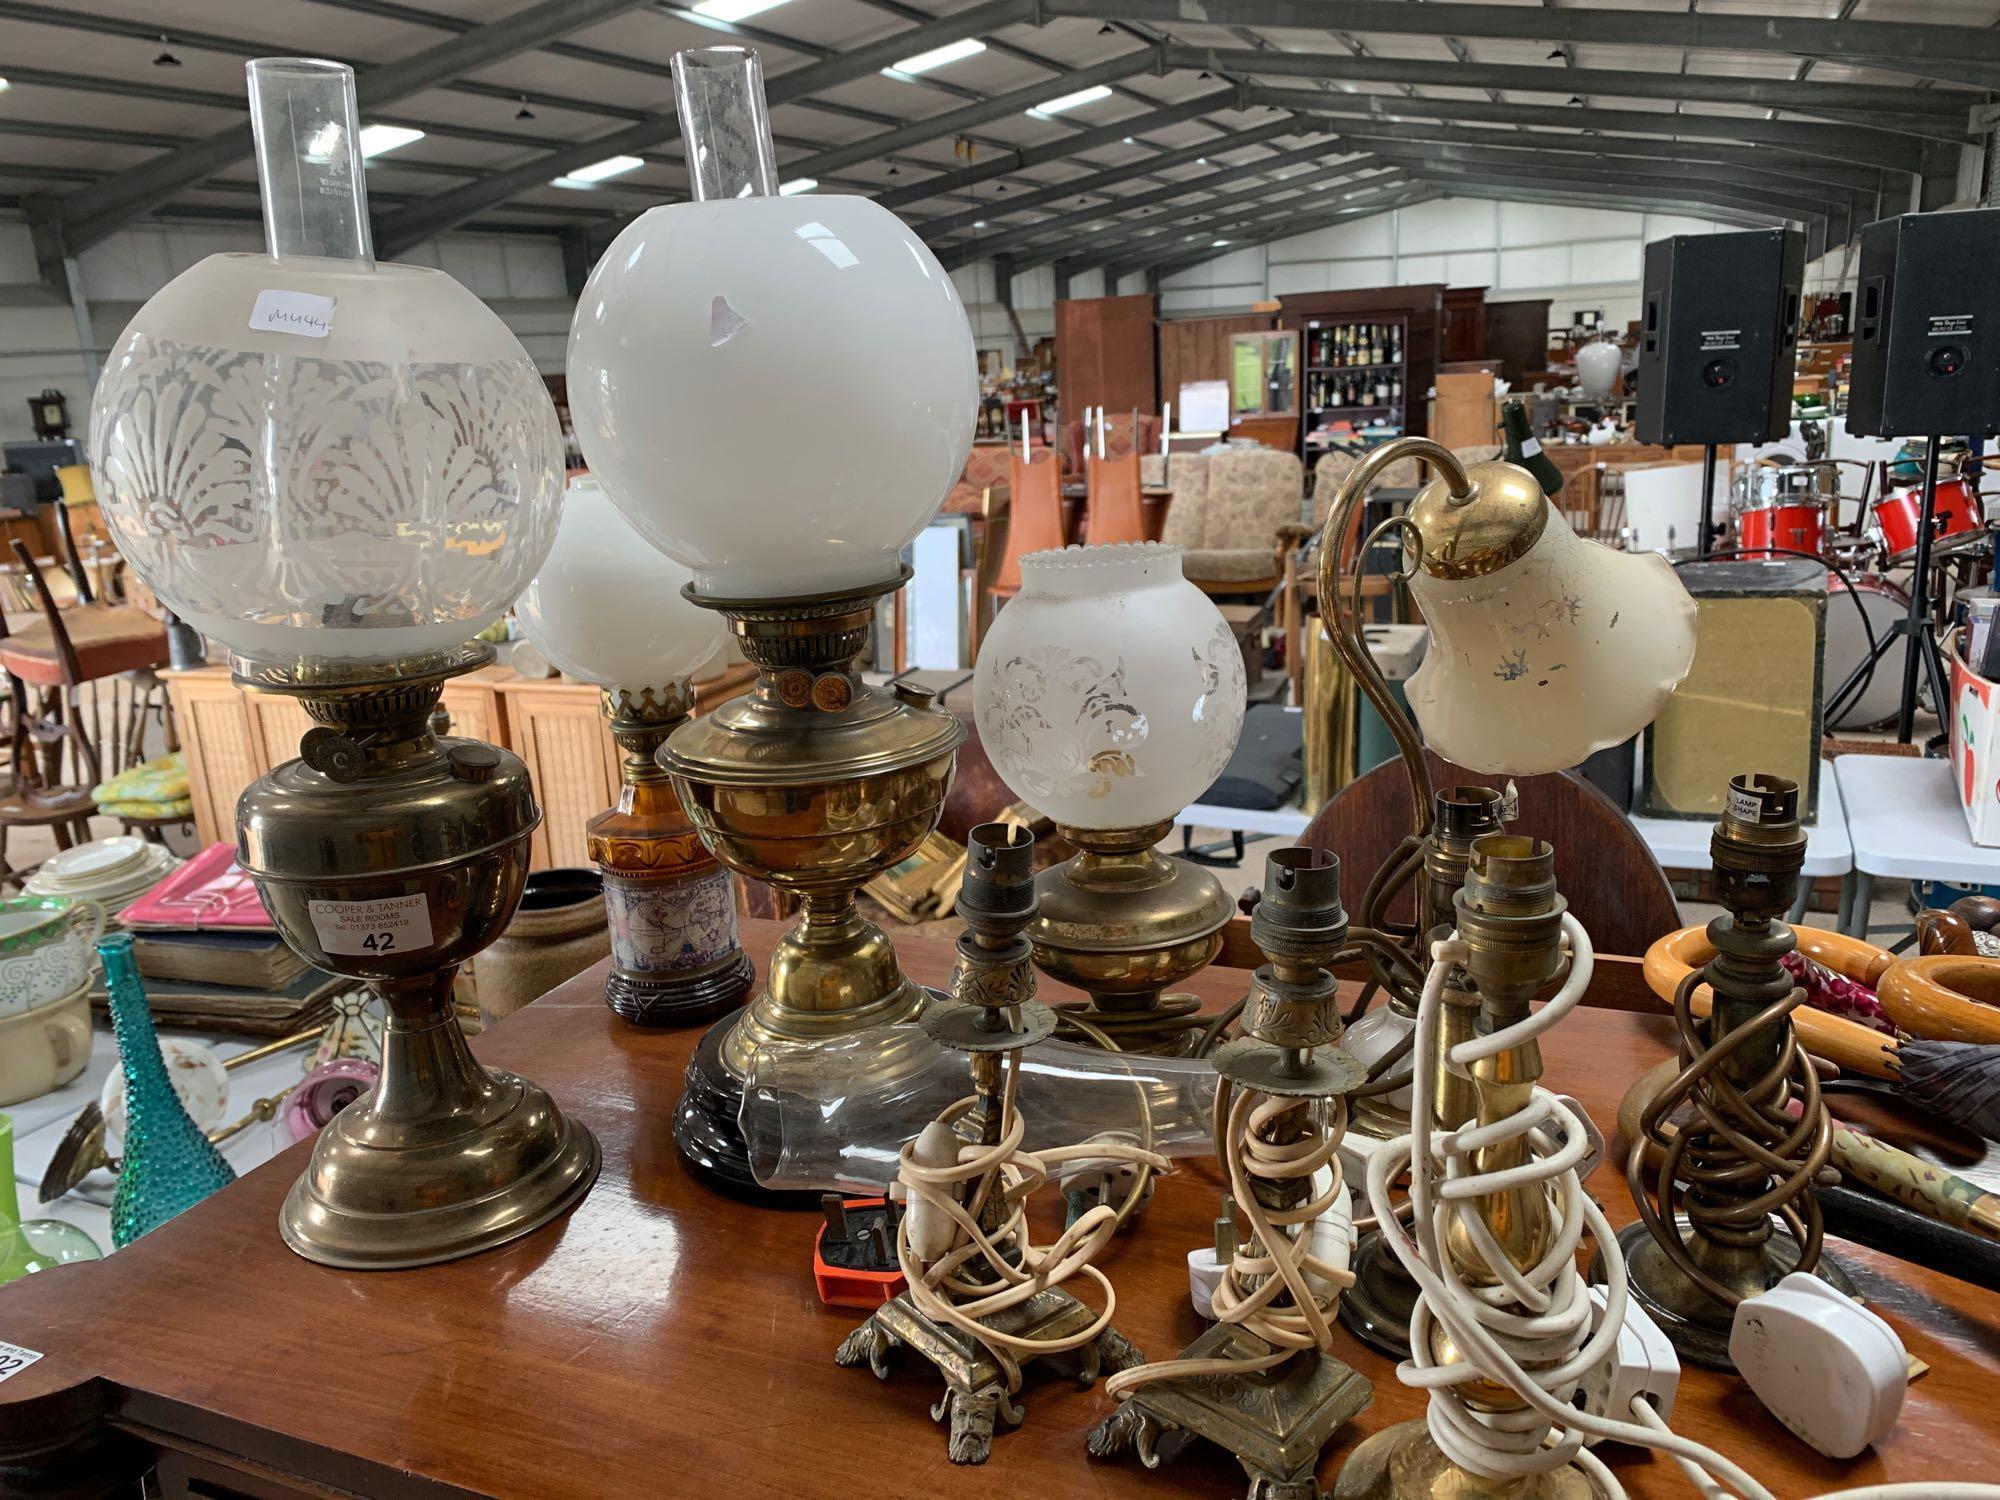 Quantity of oil lamps & other lamps